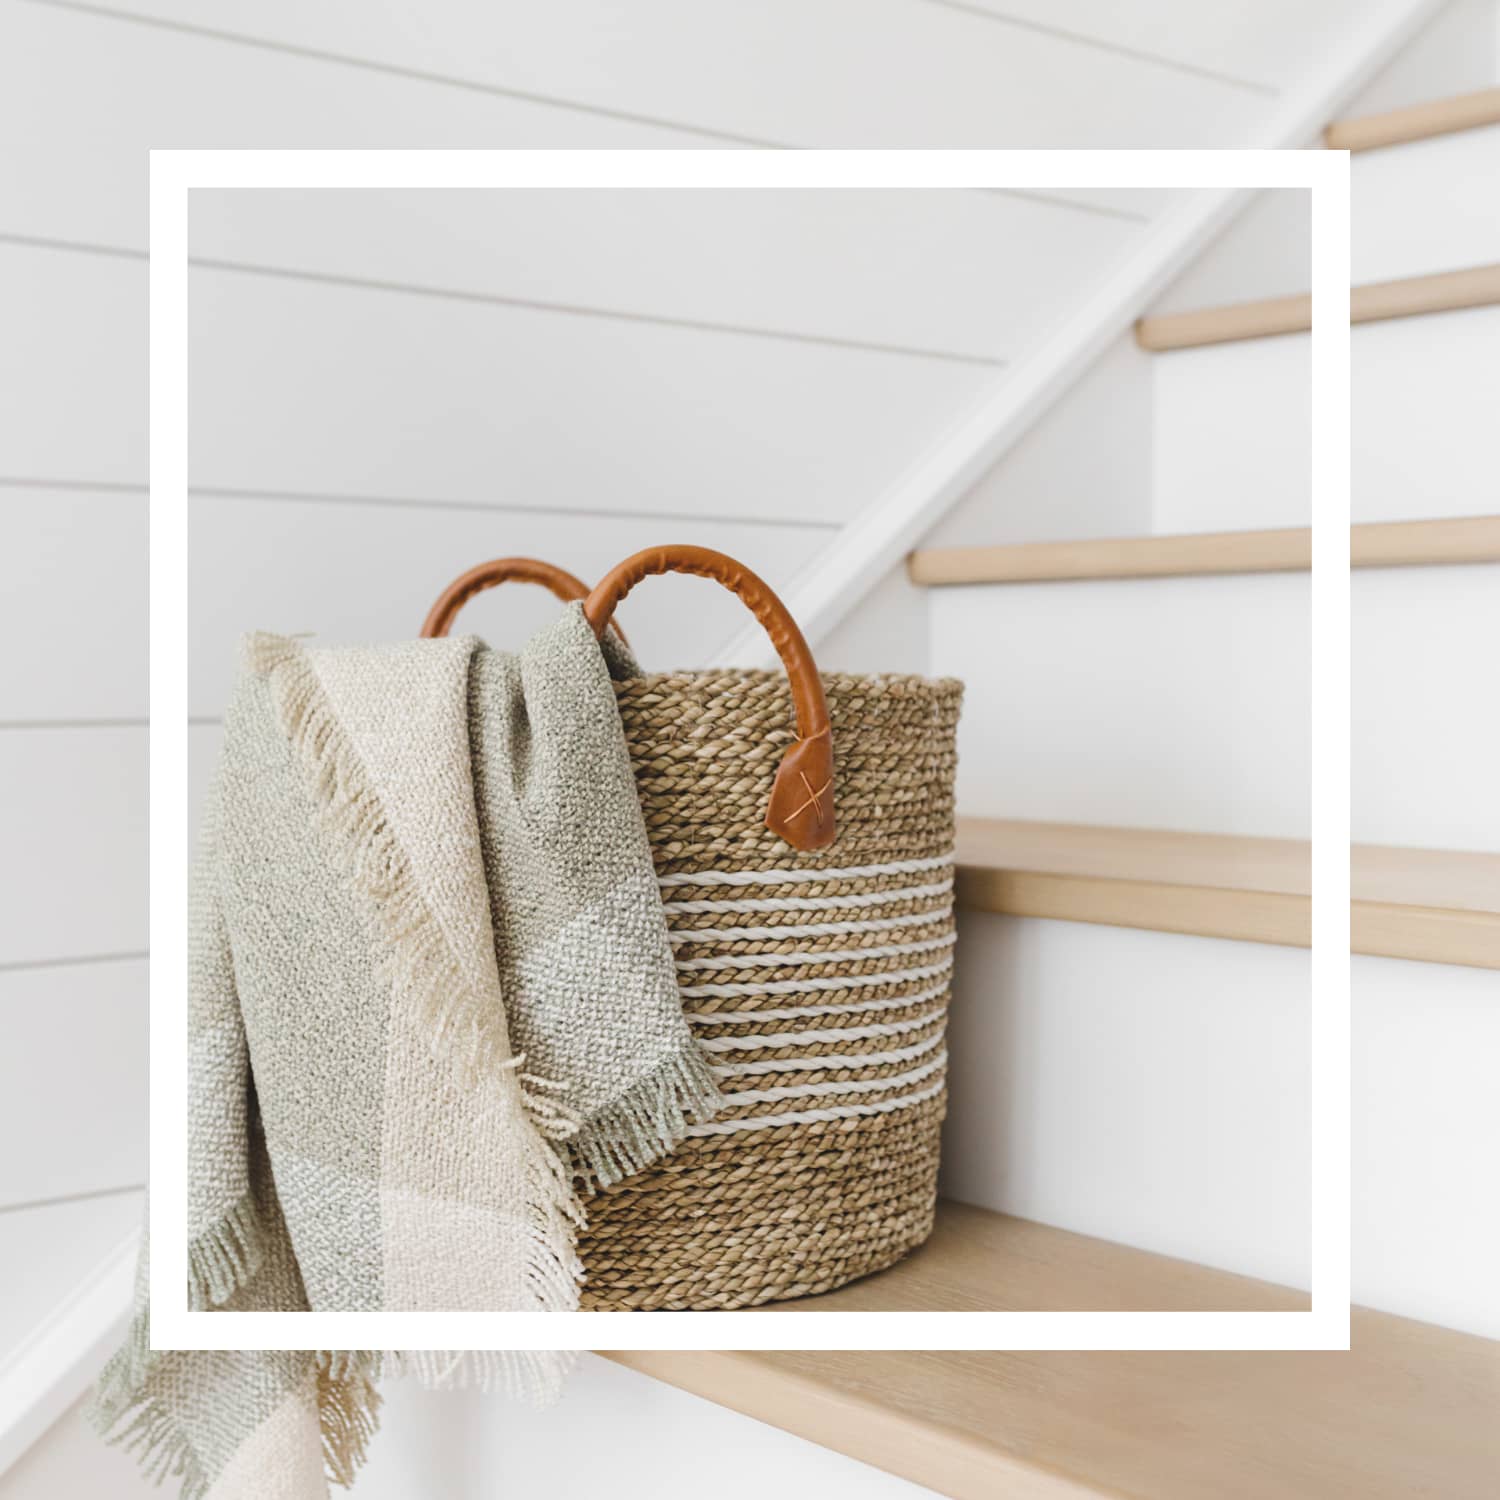 A straw basket with leather handles holding a beige plaid blanket sitting on a wooden staircase with a white frame overlay